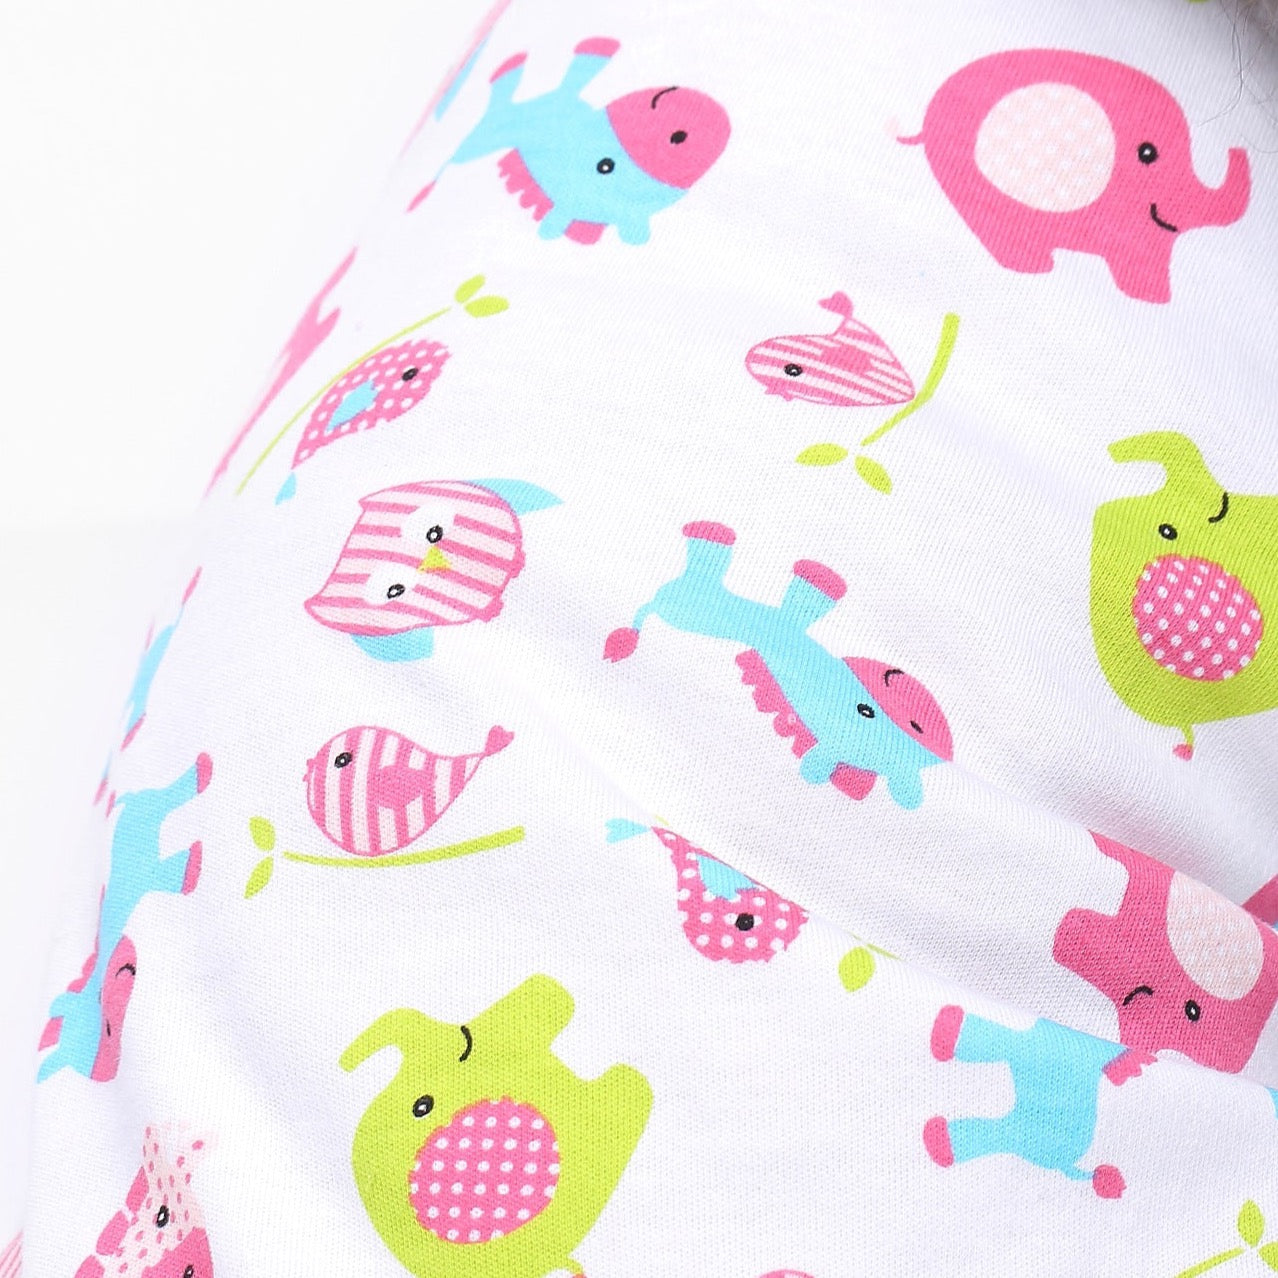 Lime green, baby blue and pink multi-colored animal prints on white fabric